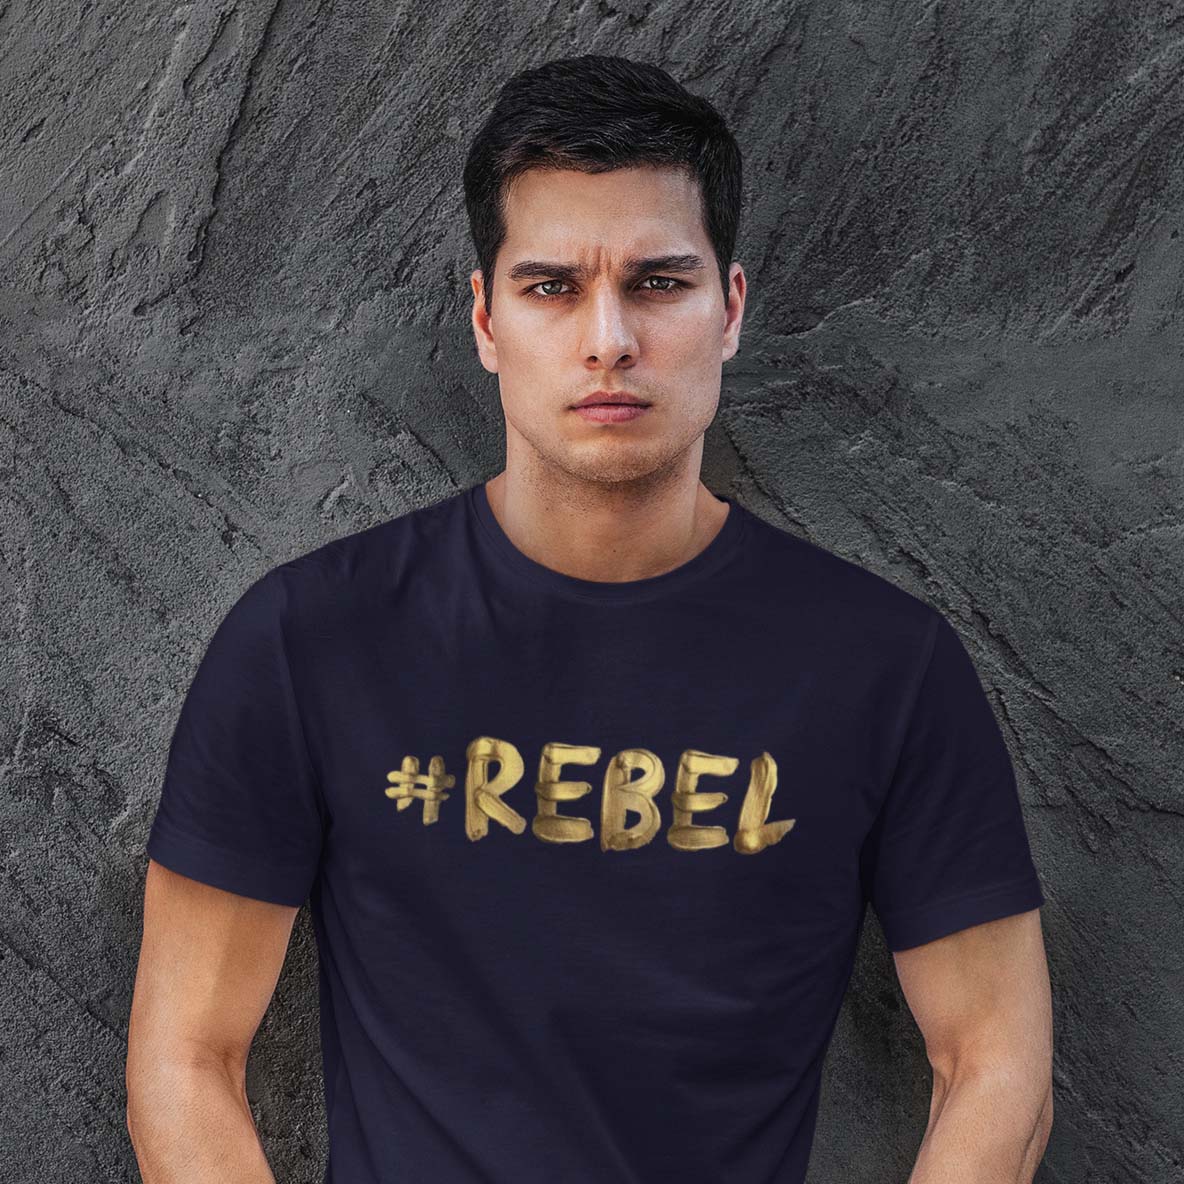 Navy men's shirt with liquid gold #REBEL meme at the front of the shirt. If you are a rebel and looking for the perfect t-shirt, this is yours!